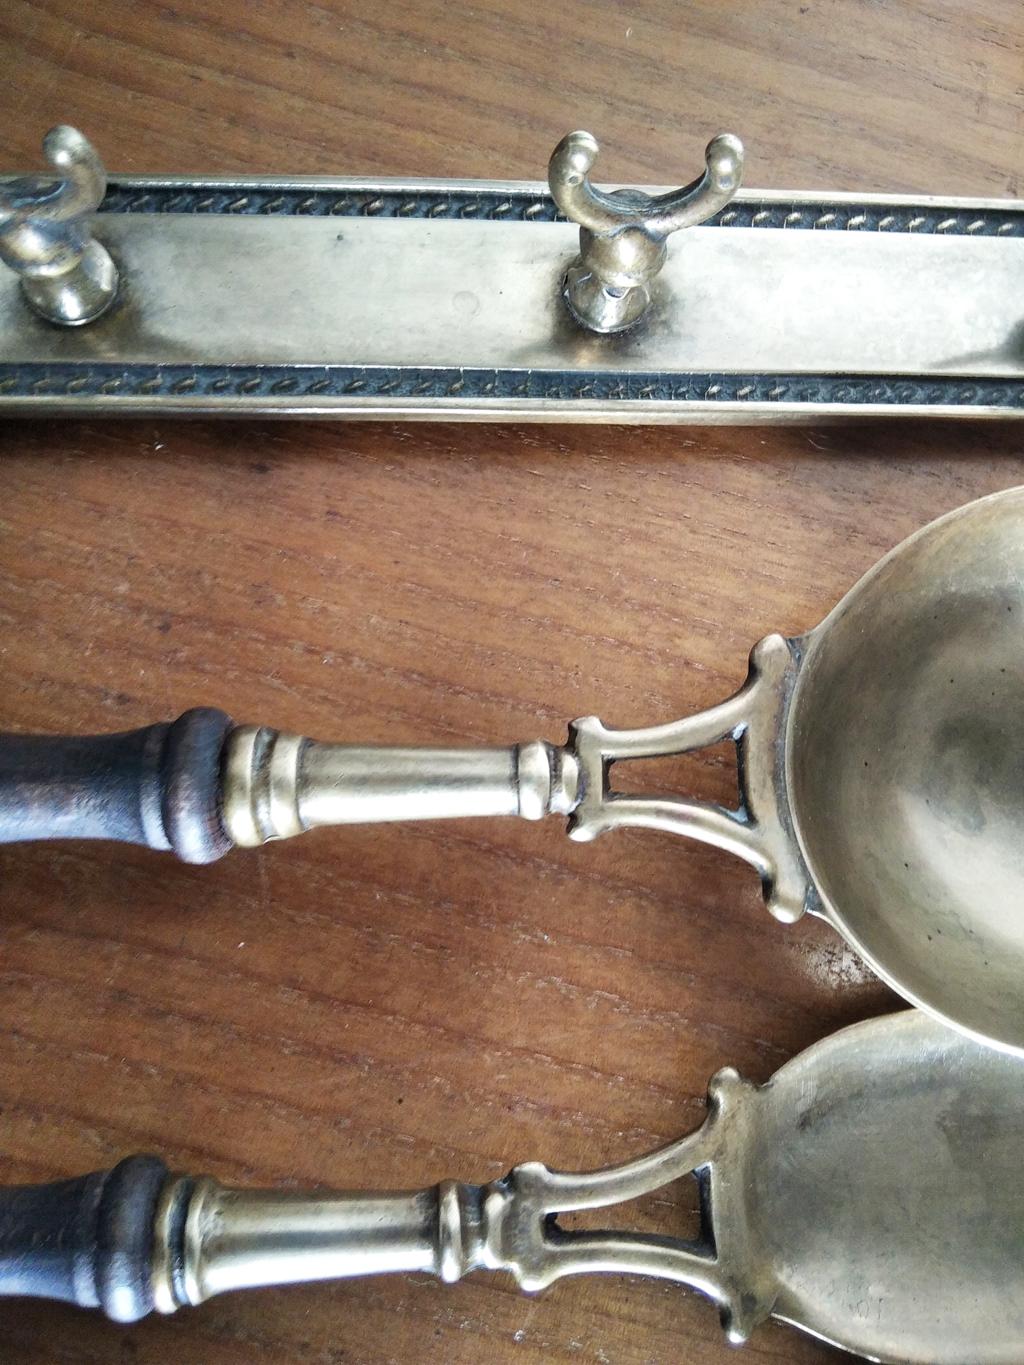 Old kitchen tools or utensils made of brass and plastic hanging from a hanging bar. Old kitchen appliance
 Midcentury 

Saucepan fork palette and serving pot

This set of brass utensils is ideal to decorate a kitchen of any style, because its